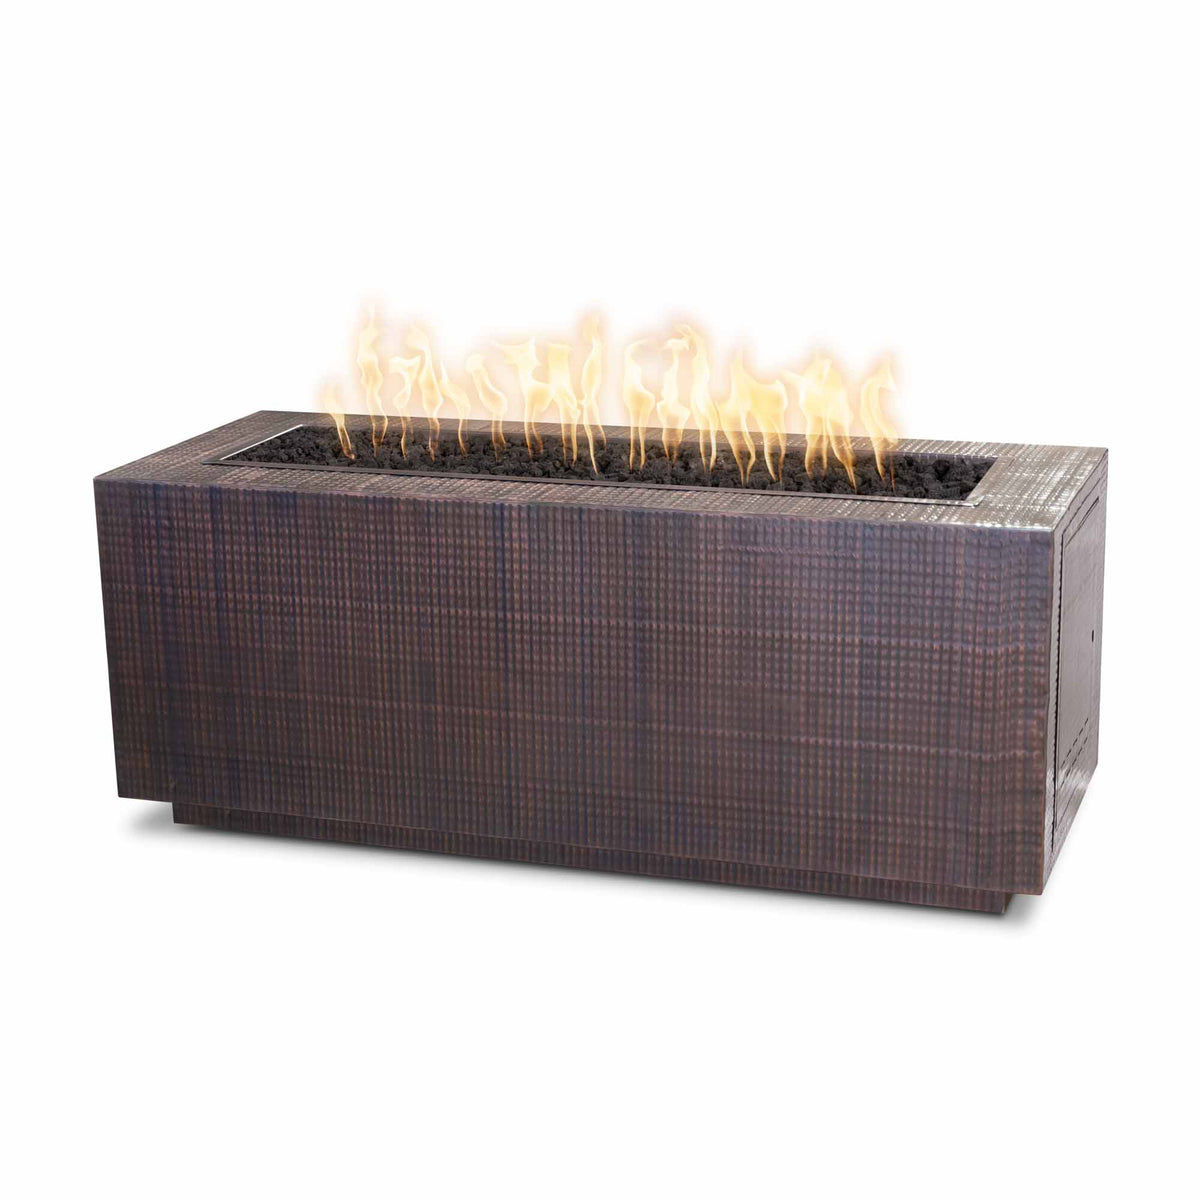 The Outdoor Plus - Pismo Fire Pit - Hammered Copper